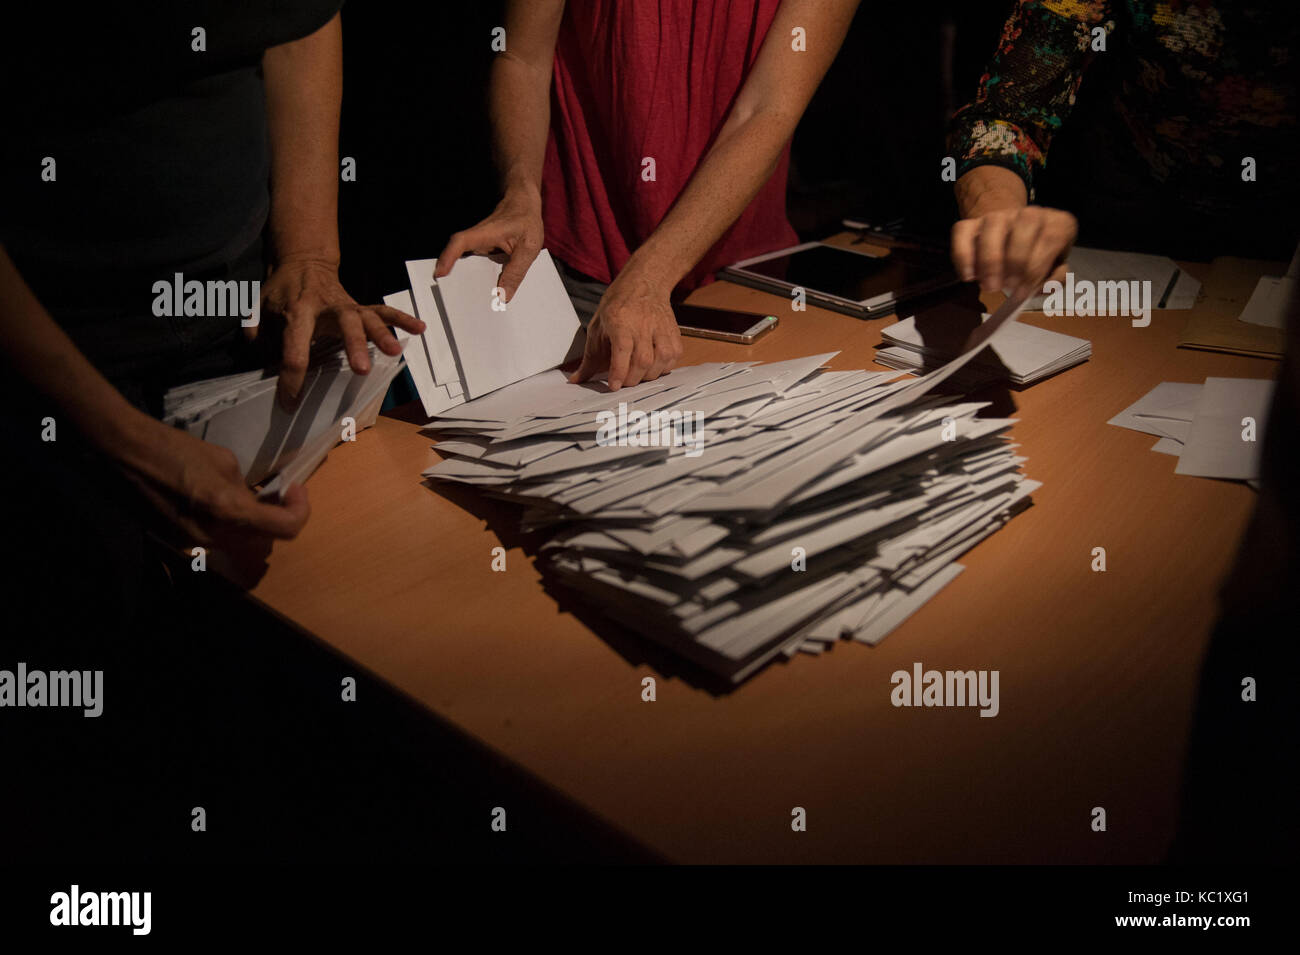 Barcelona, Catalonia. October 1, 2017. During the counting process, the lights have been turned off to make the location of the police more difficult.The vote counting begins, shuffle data of participation of 3,000,000 people. Credit: Charlie Perez/Alamy Live News Stock Photo